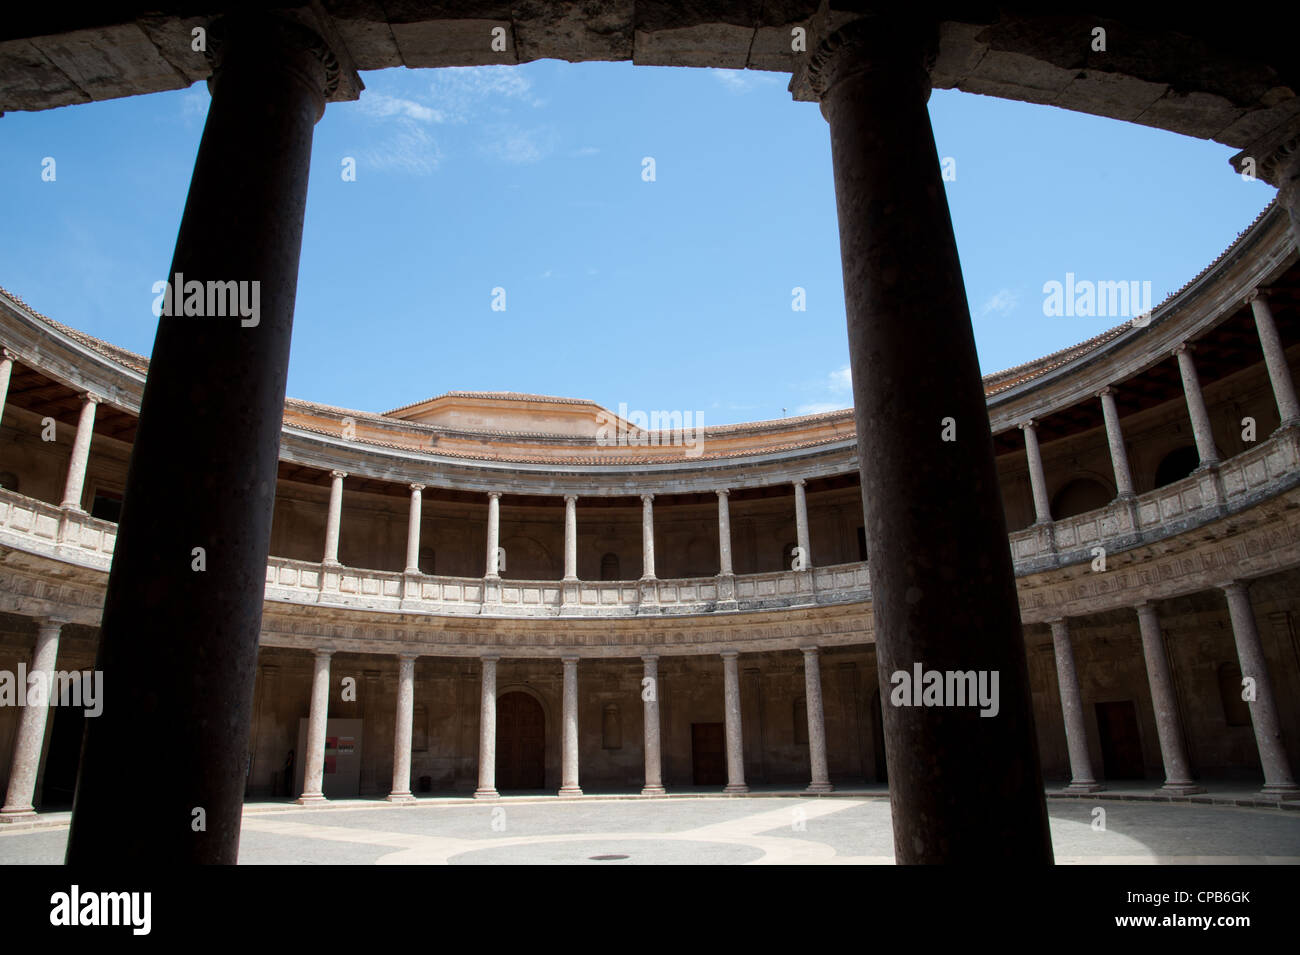 A columned courtyard at the Palace of Charles V (Palacio de Carlos V), site of the Museum of the Alhambra in Granada, Spain. Stock Photo